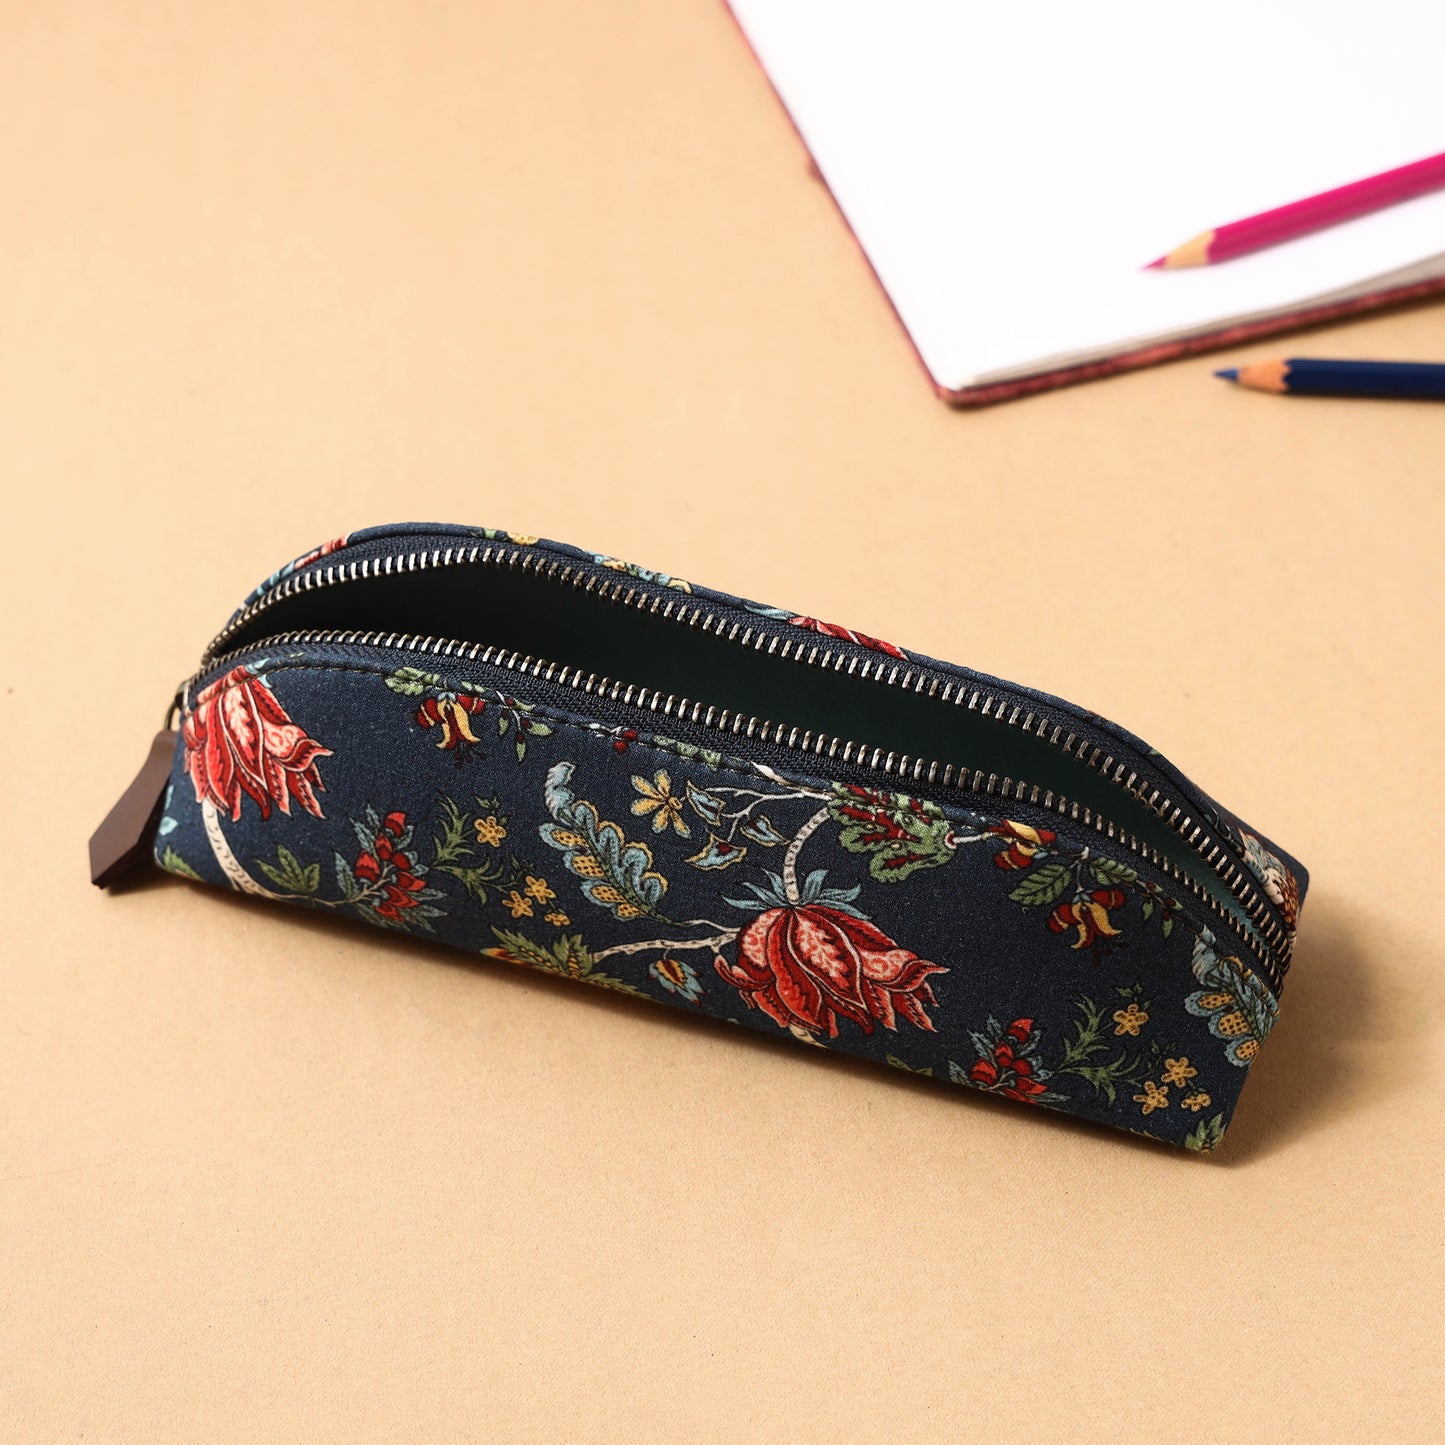 Floral Printed Handcrafted Pencil Pouch